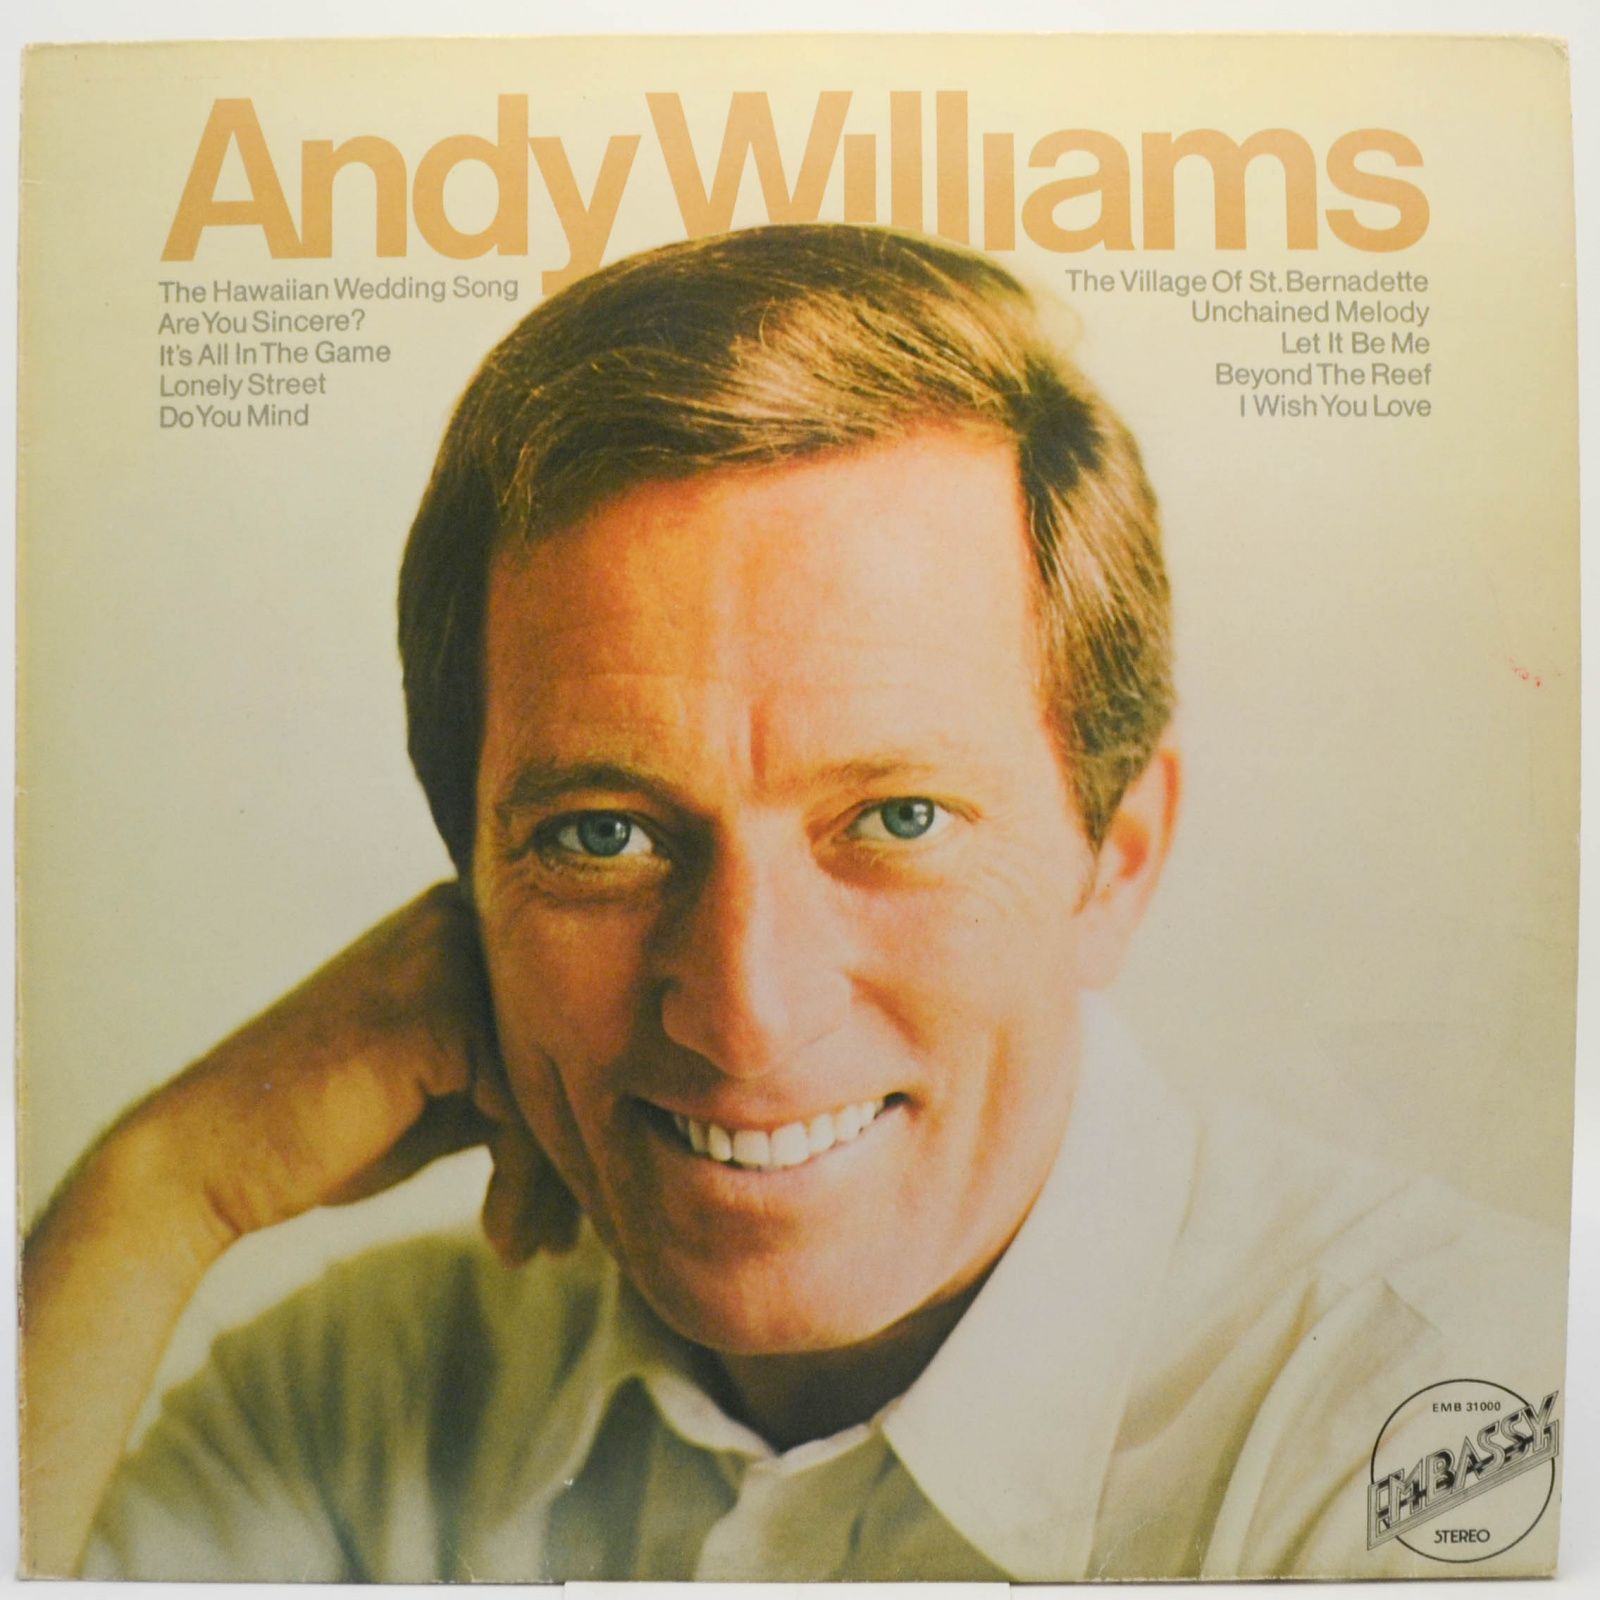 Andy Williams — Andy Williams, 1970